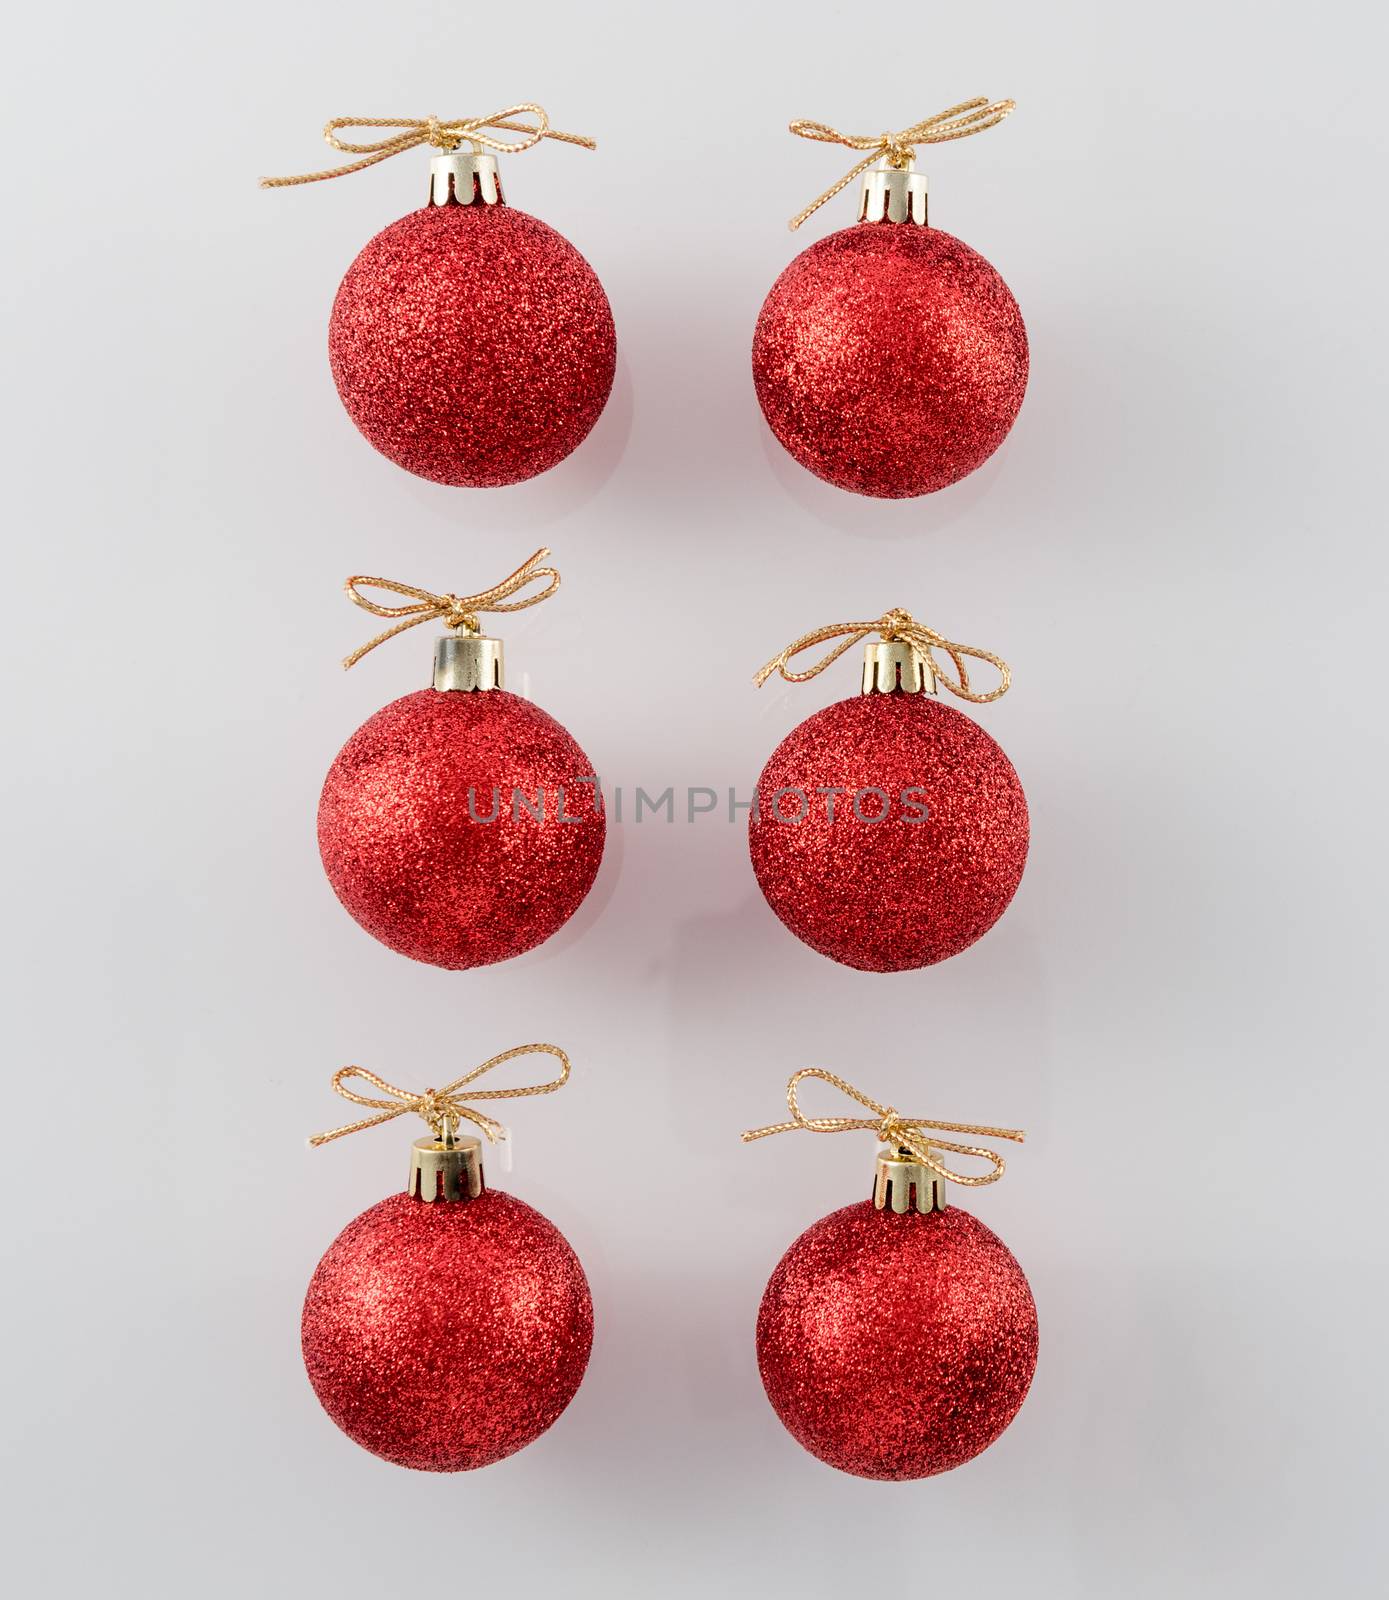 Red Glitter Christmas Ornaments by krisblackphotography